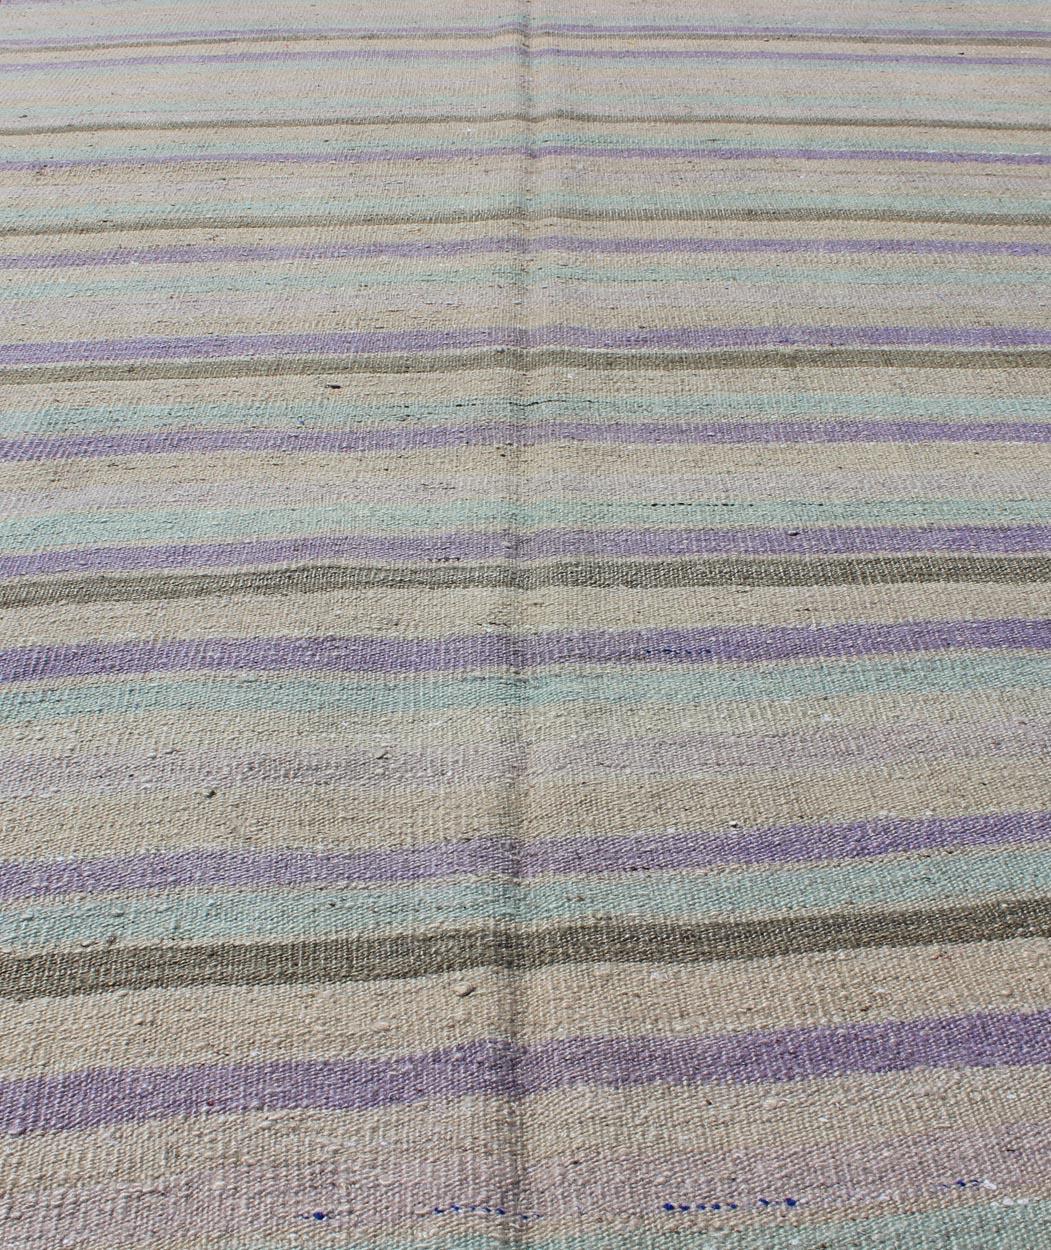 Vintage Turkish Kilim with Stripes in Light Teal, Pastel Purple, Cream and Taupe In Excellent Condition For Sale In Atlanta, GA